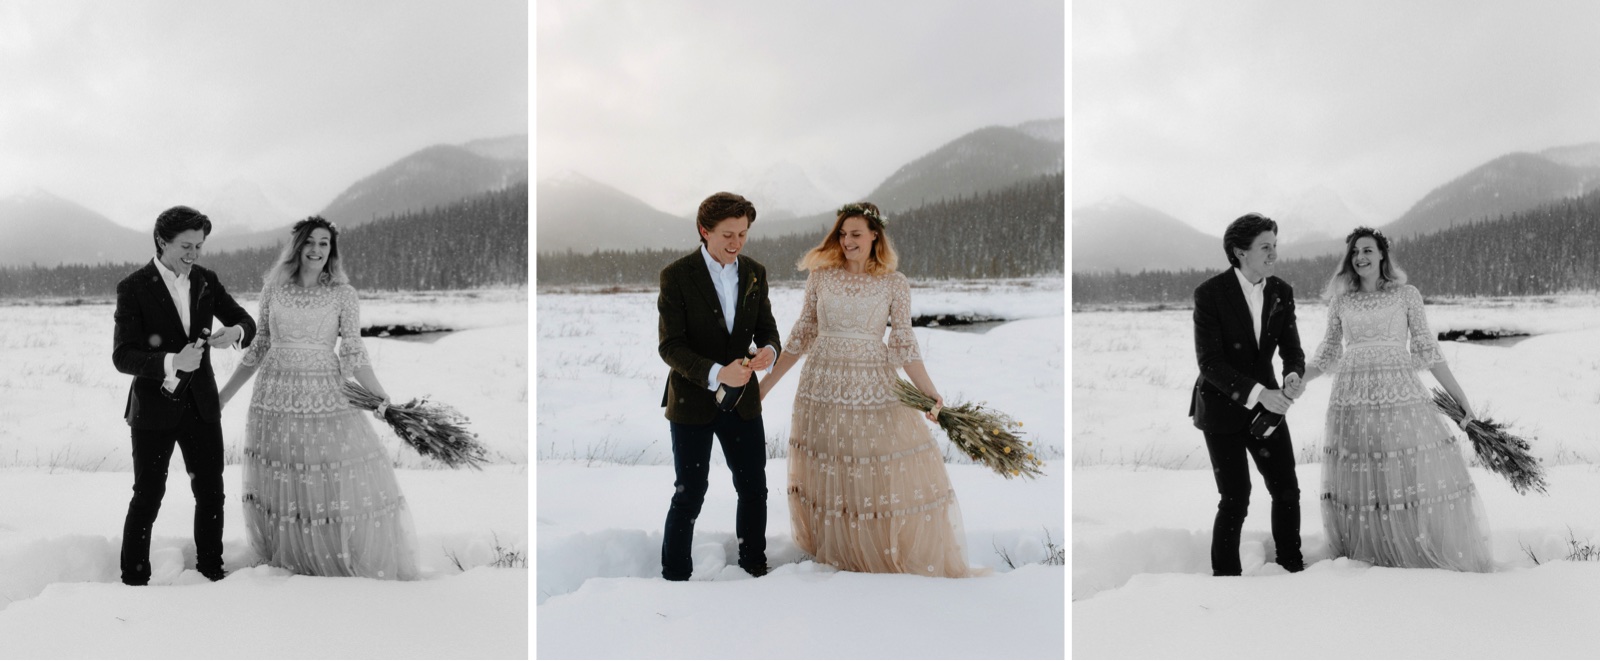 Couple in a snowy field popping a bottle of champagne to celebrate eloping at Engadine Lodge